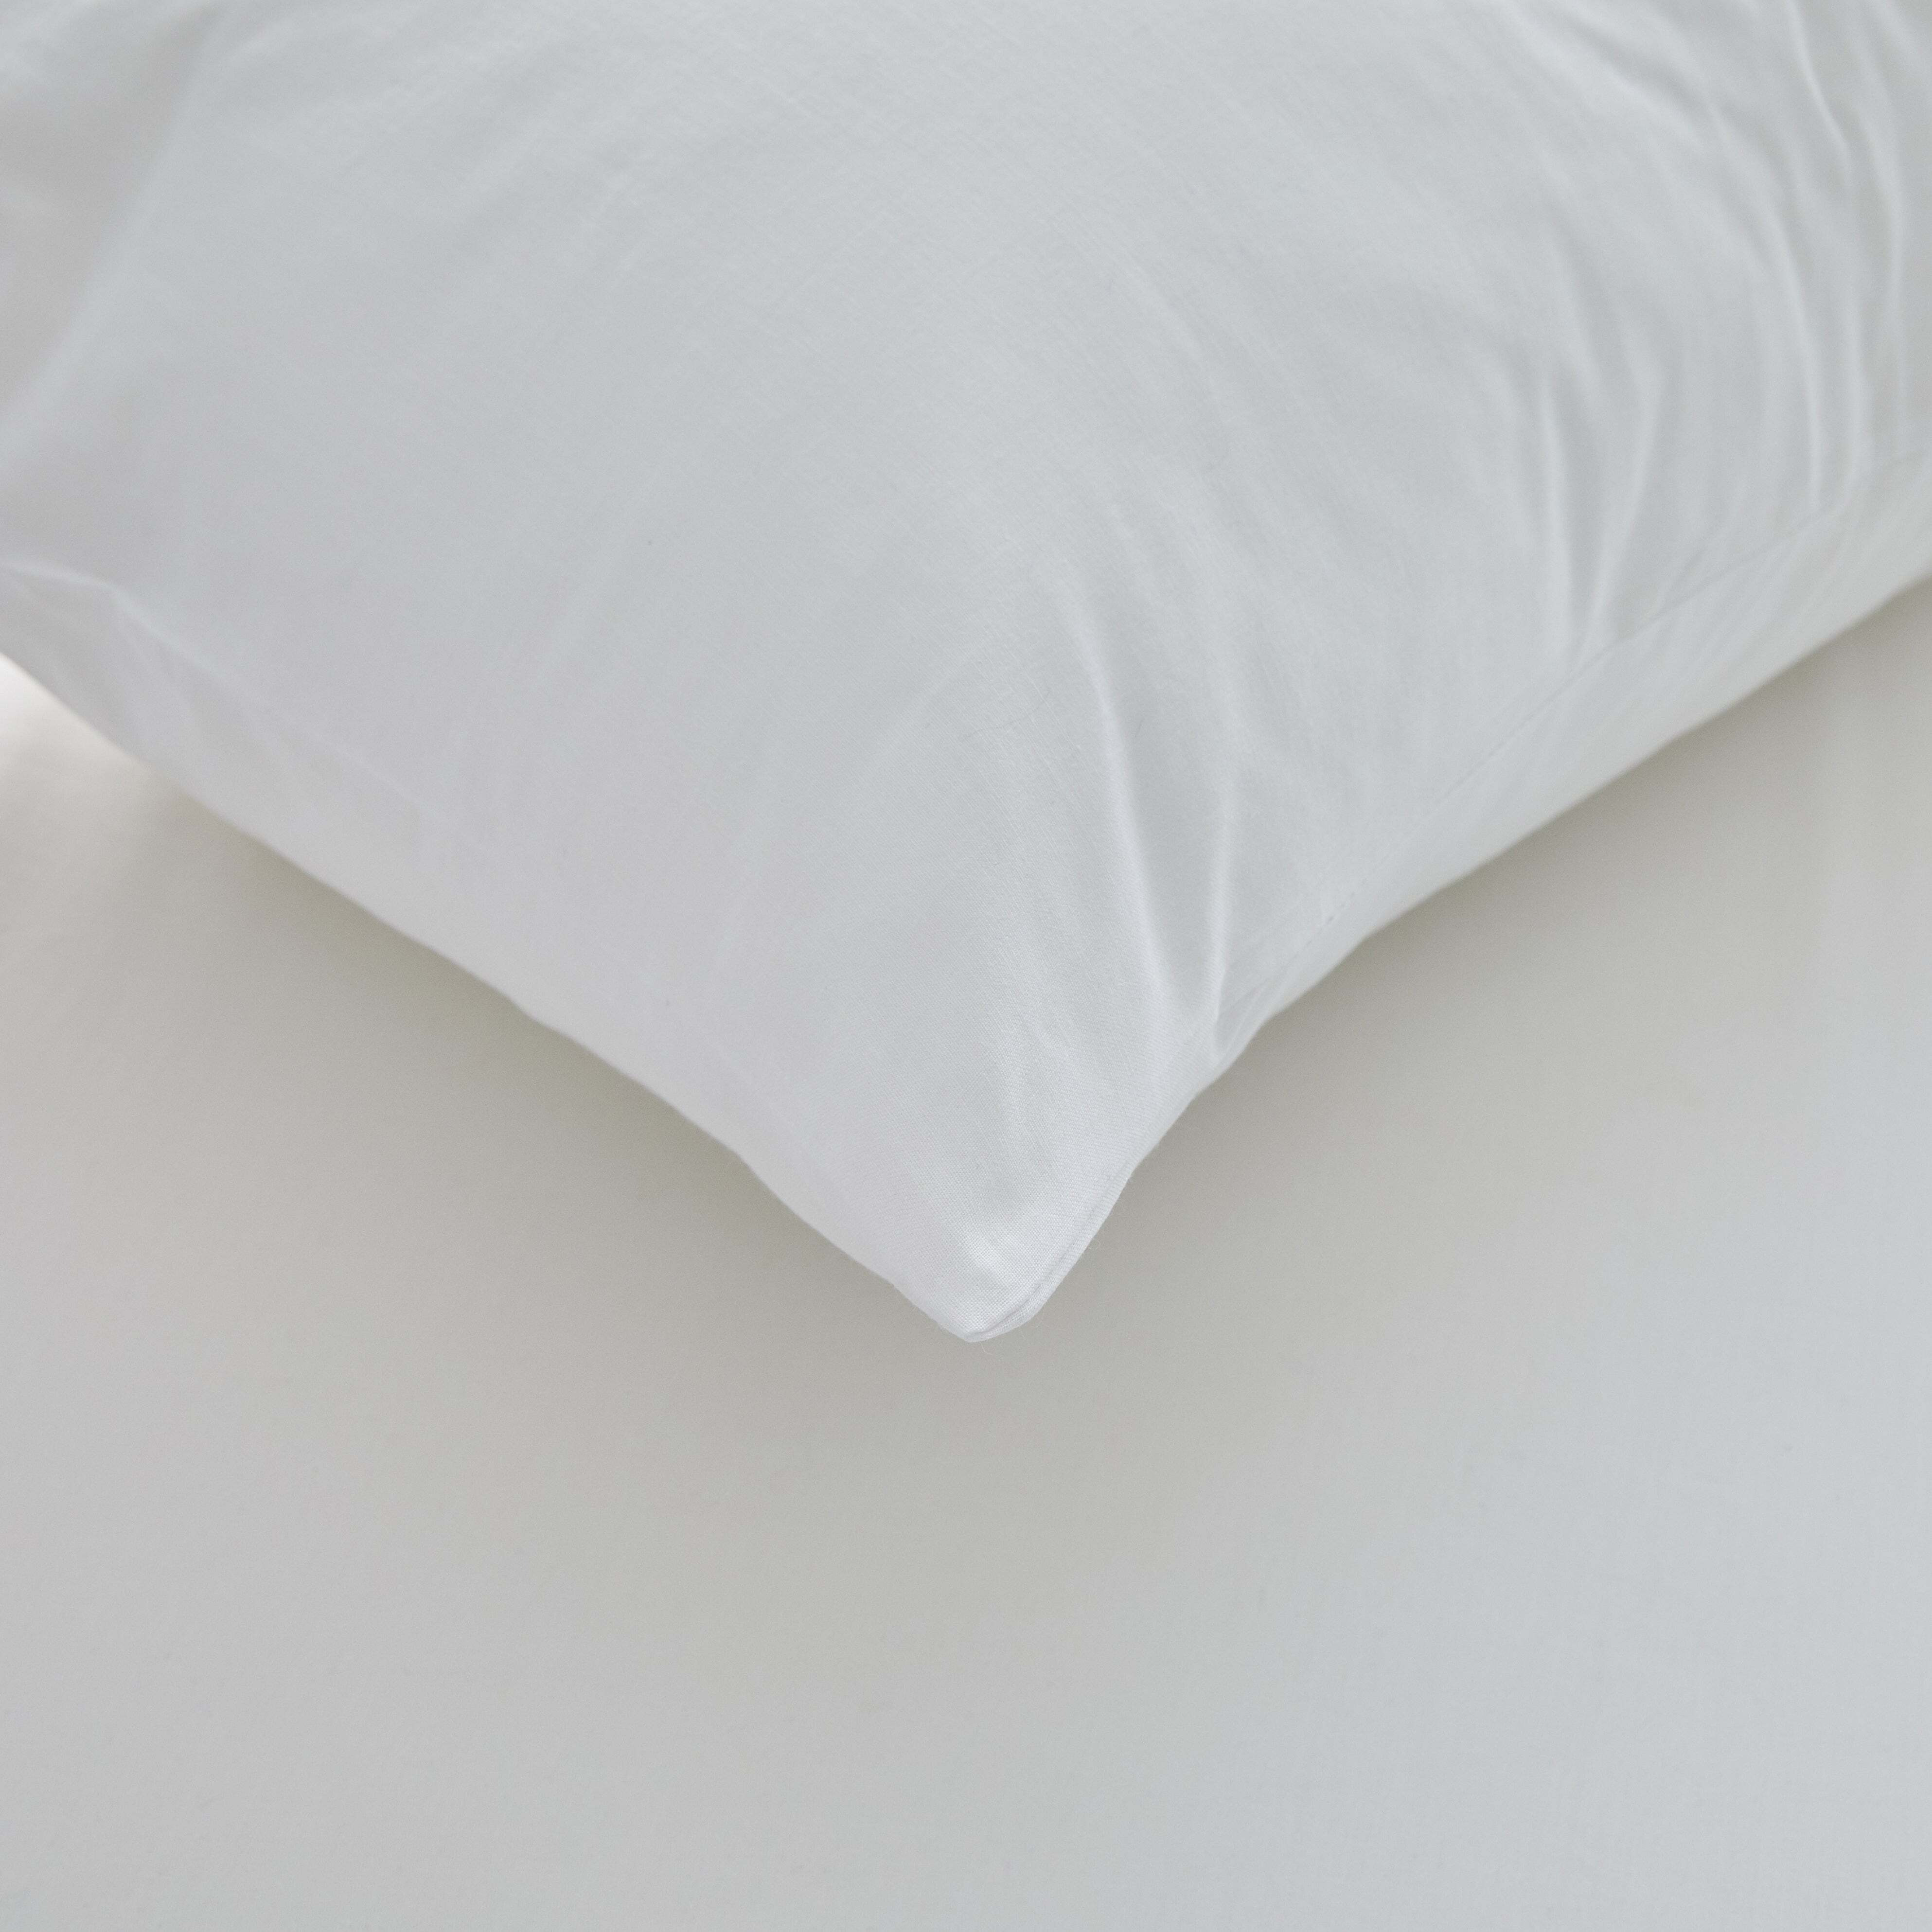 Freshnights Cotton Zipped Pair of Pillow Protectors White